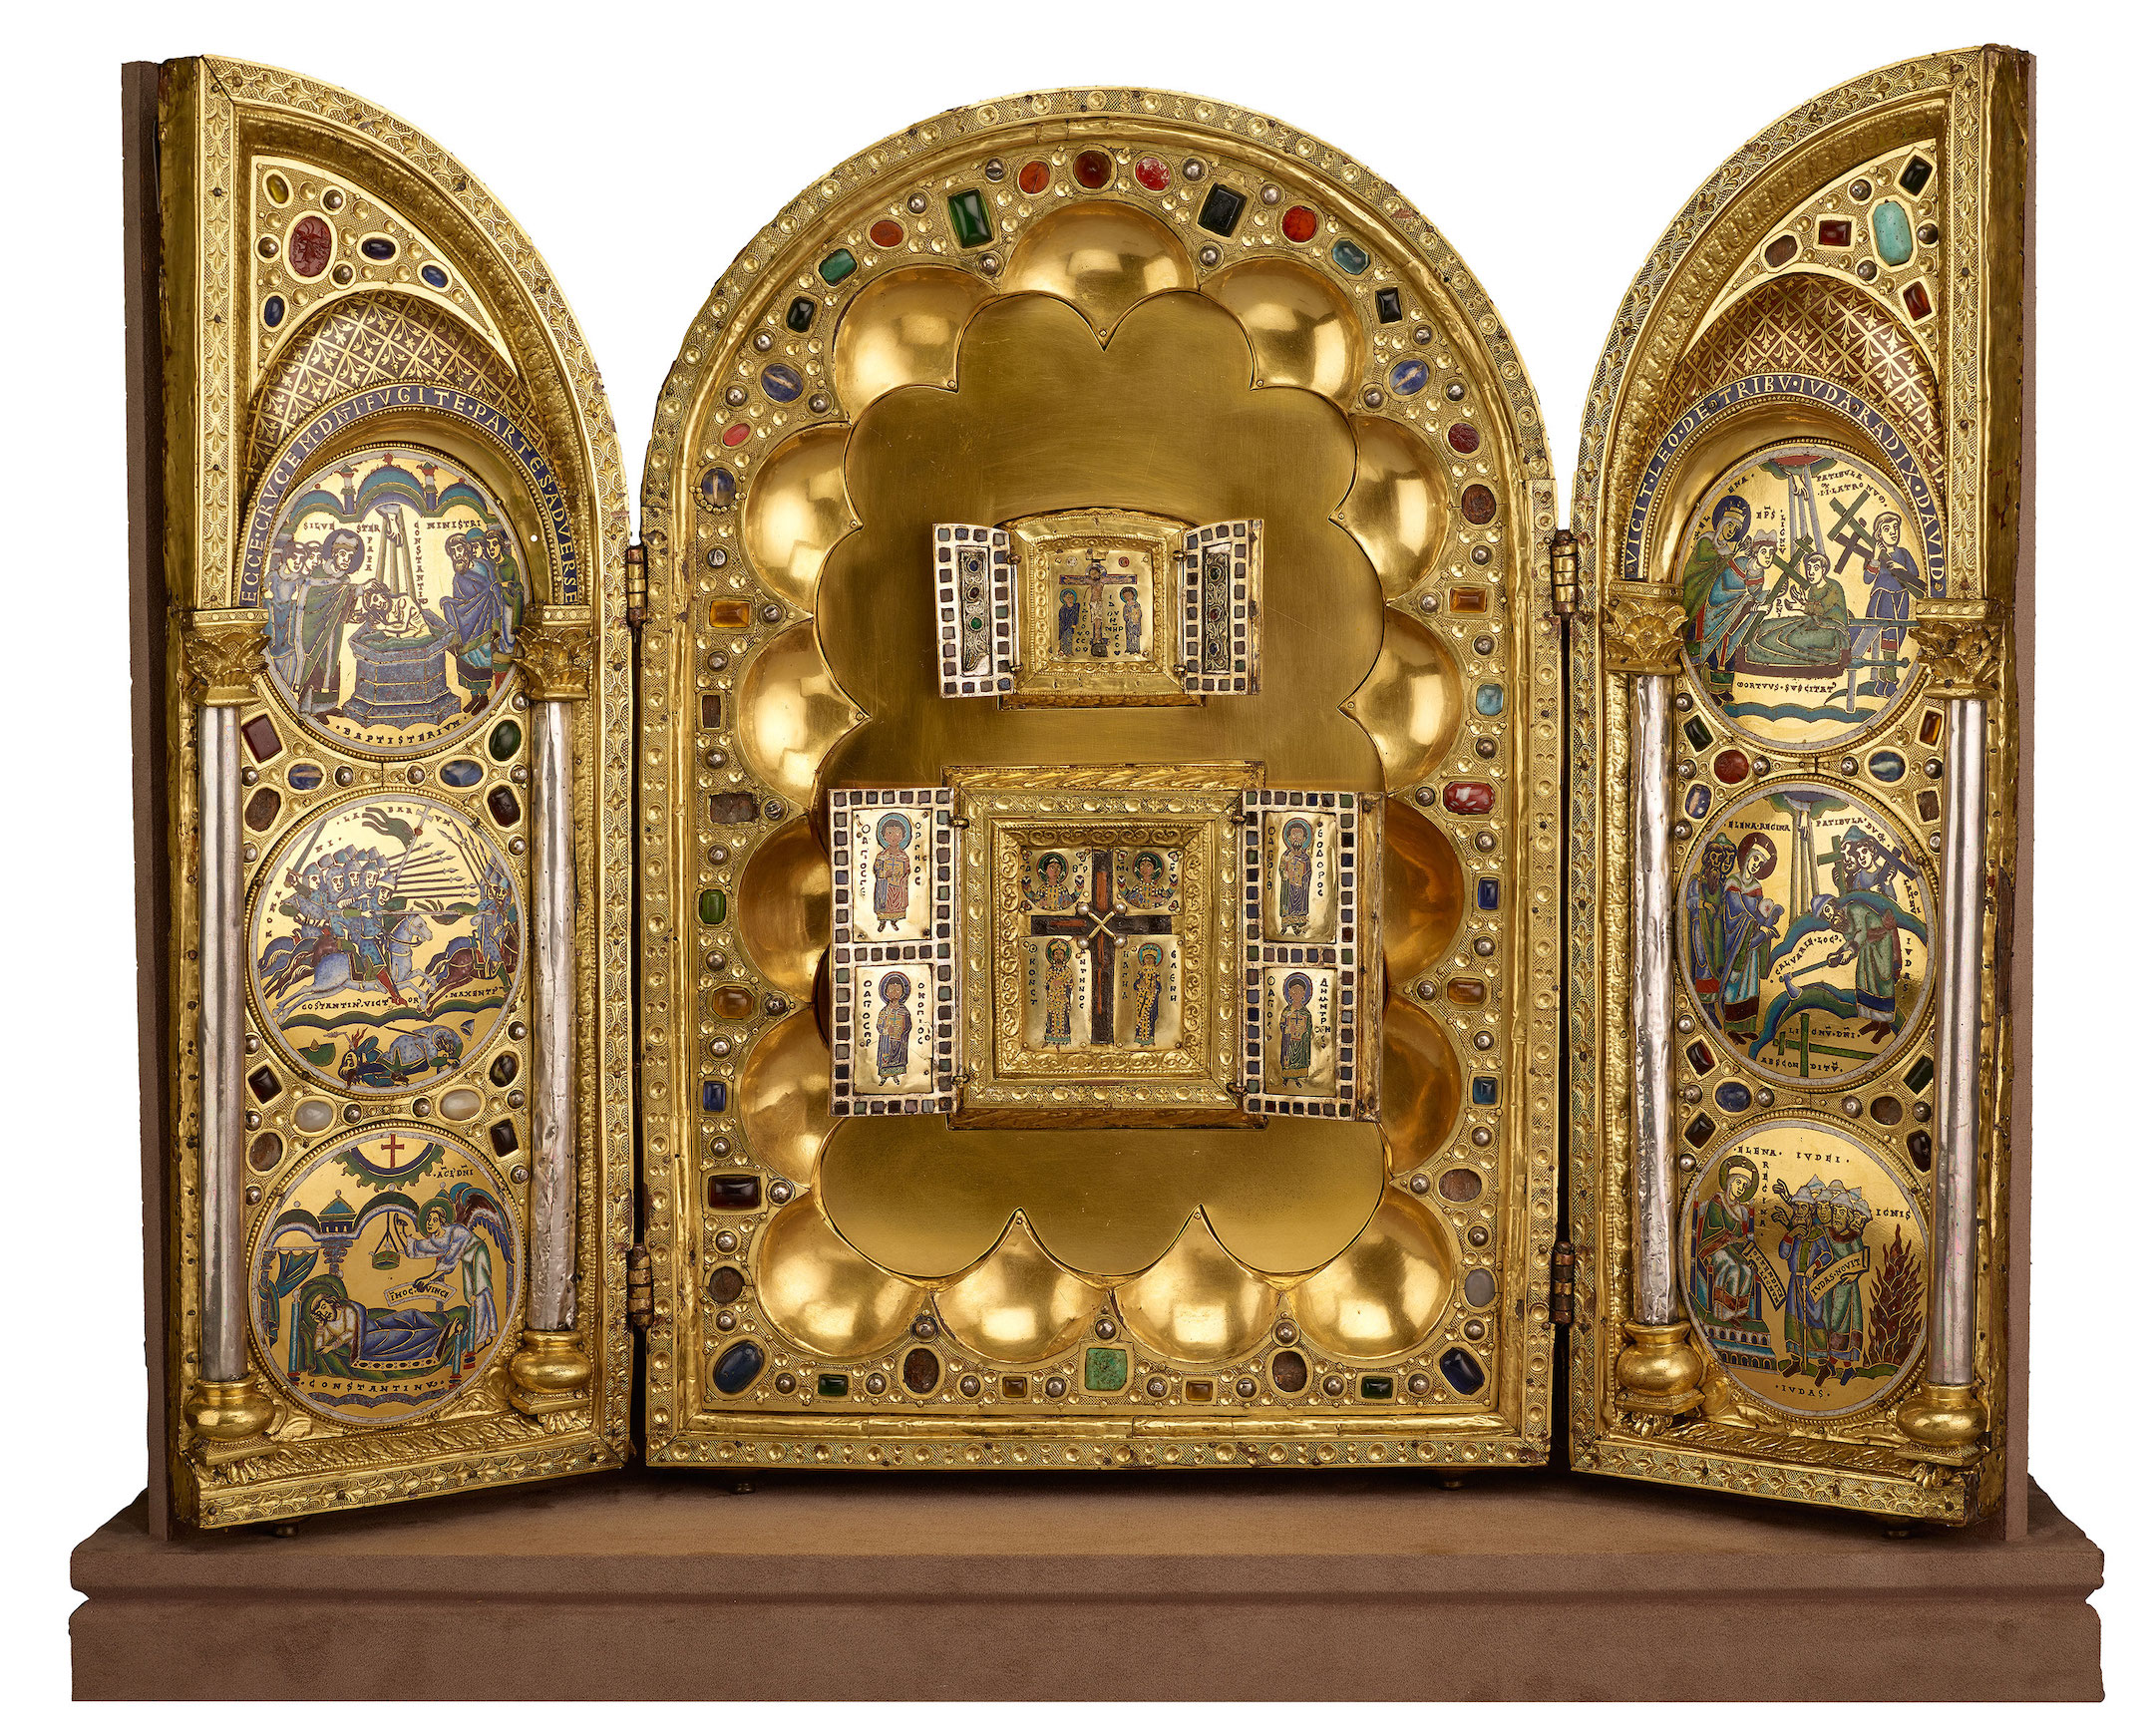 Stavelot Triptych, c. 1156–58, gold and enamel, 48 x 66 cm open (The Morgan Library and Museum, New York)